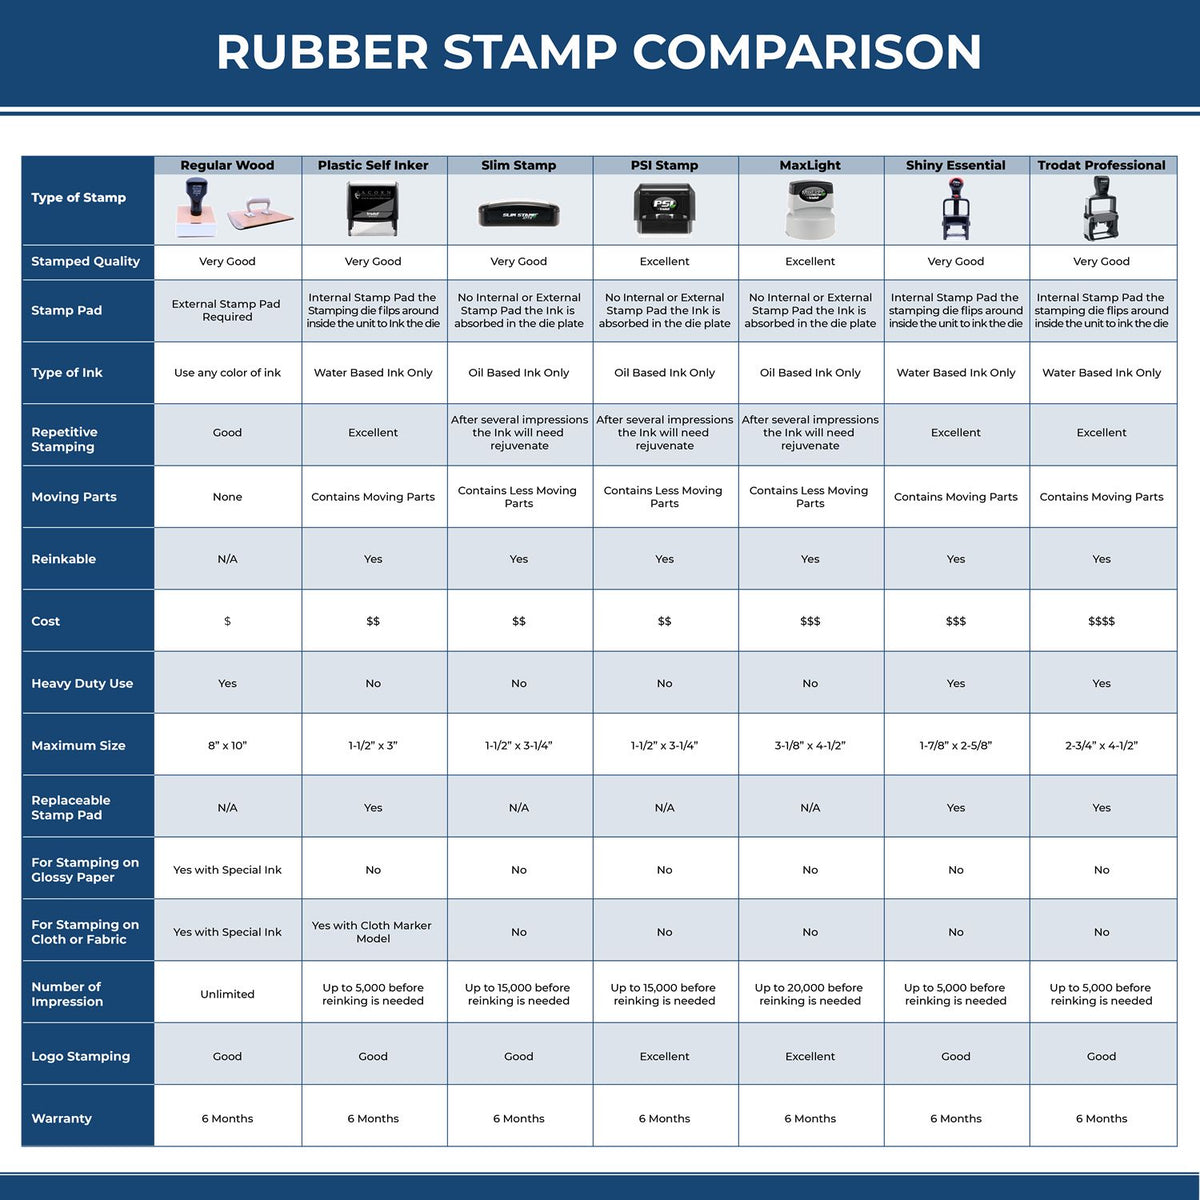 A comparison chart for the different types of mount models available for the Premium MaxLight Pre-Inked Indiana Landscape Architectural Stamp.